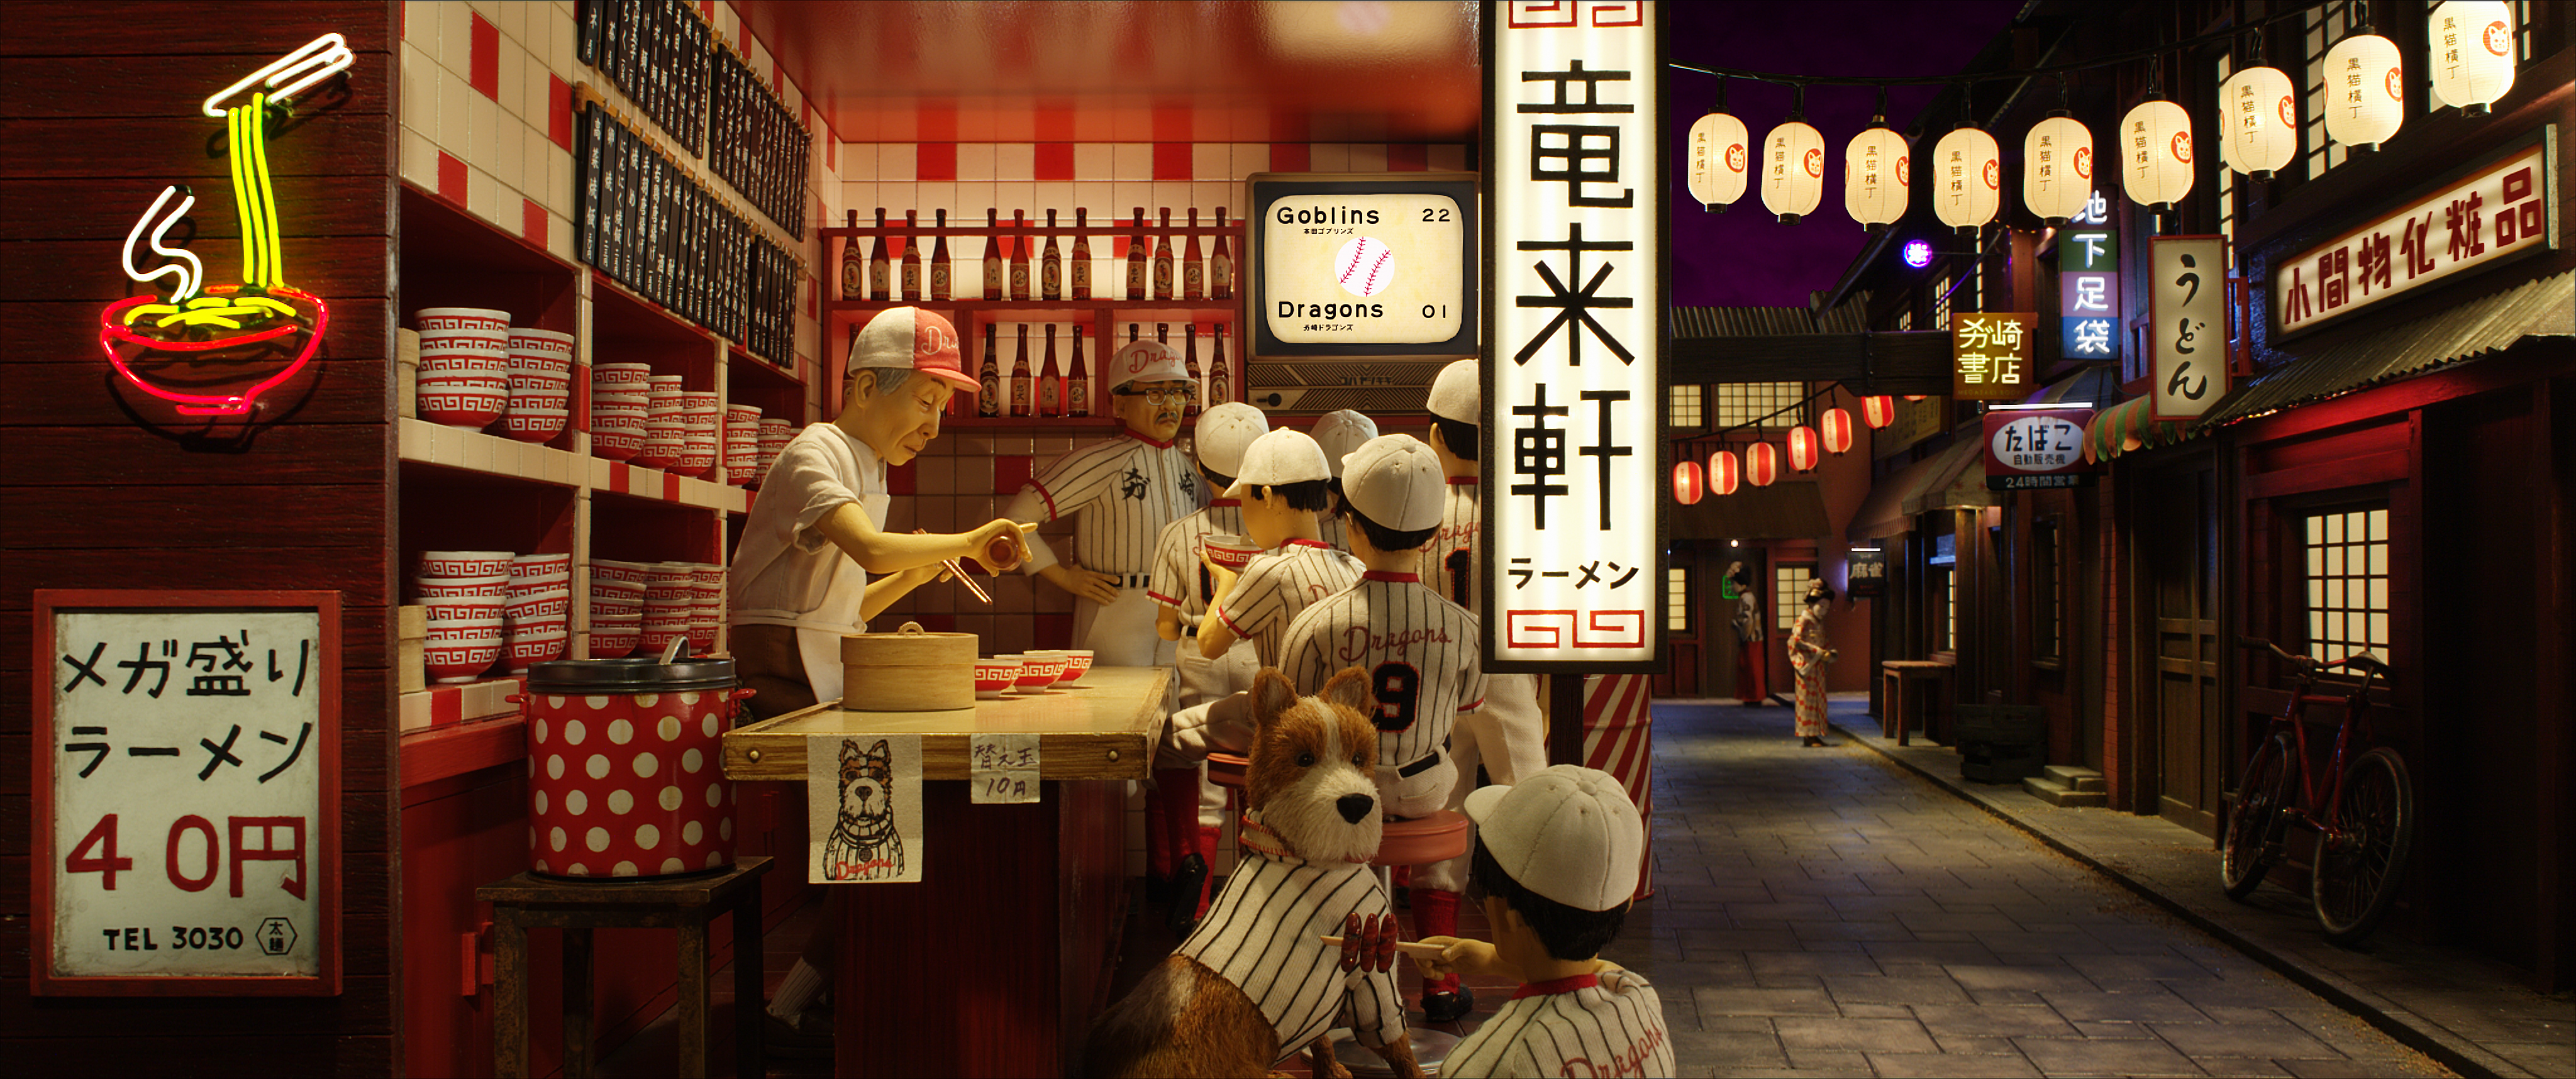 Bill Murray as 'Boss' in a ramen bar in Wes Anderson's Isle of Dogs. (Photo Courtesy of Fox Searchlight Pictures)